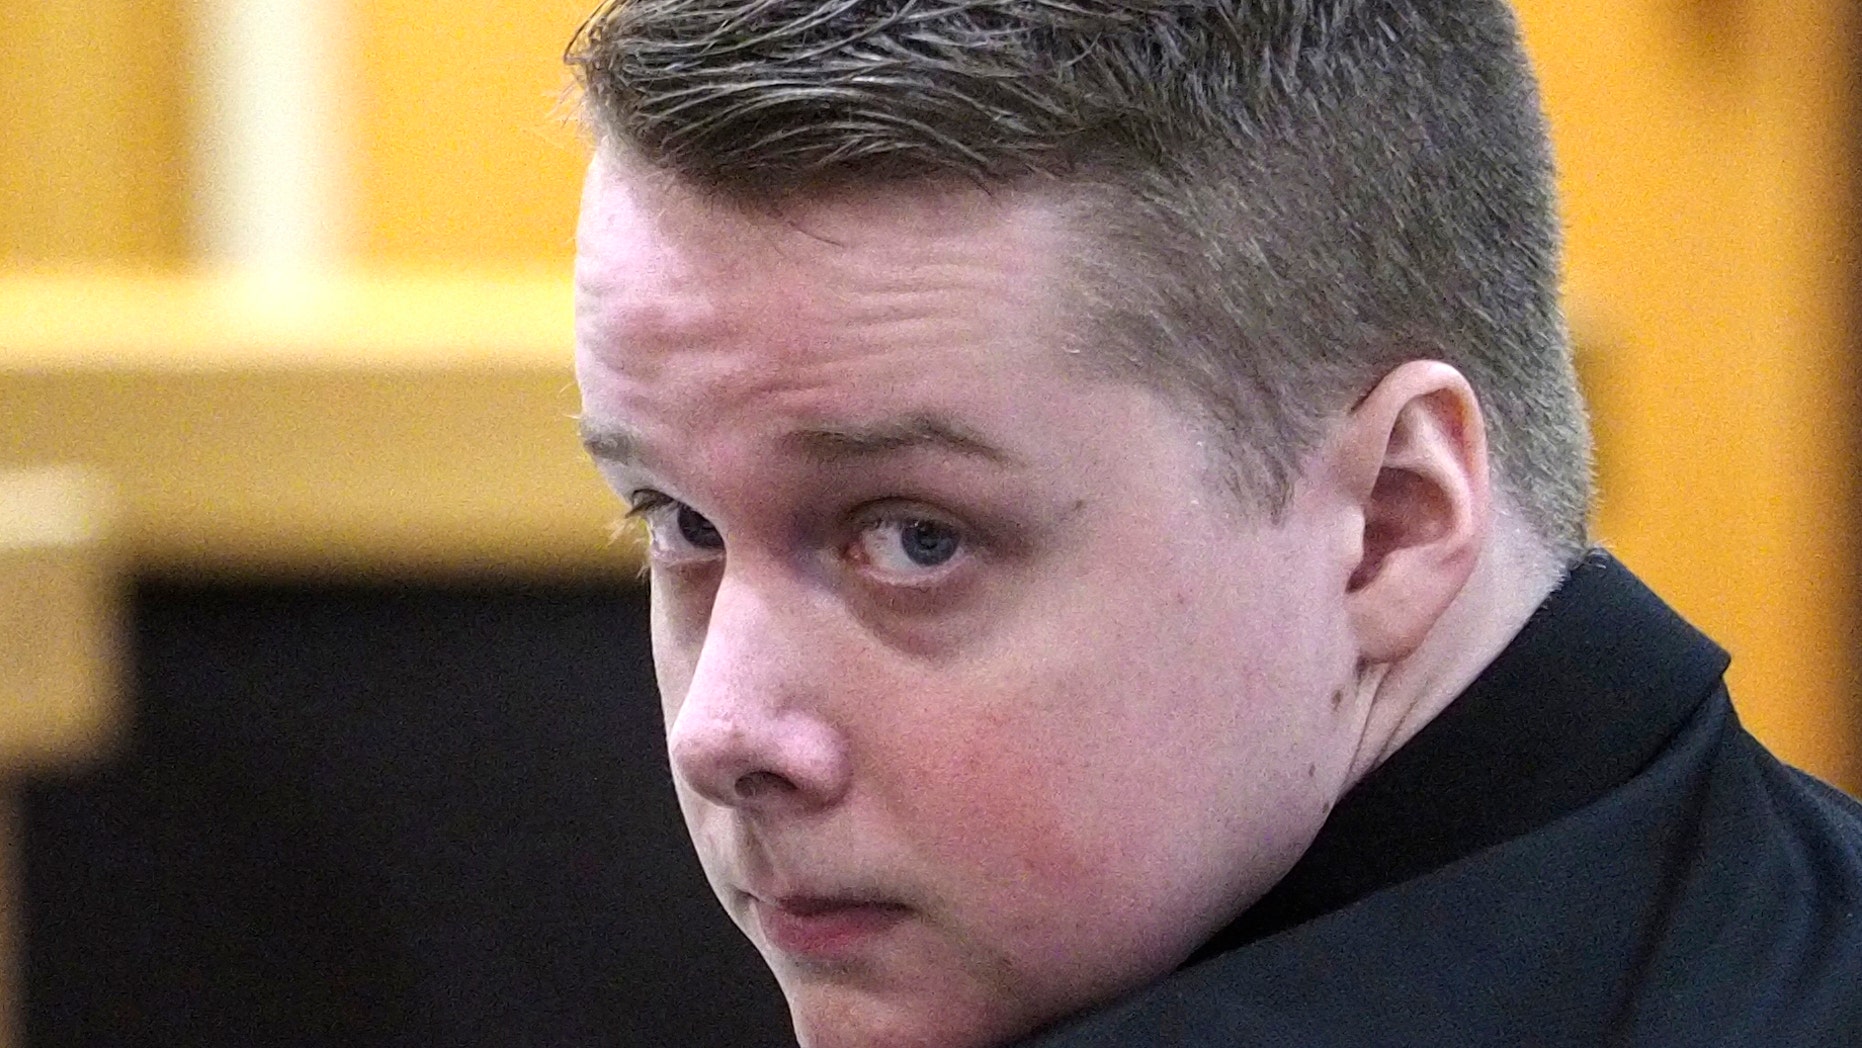   Accused Liam McAtasney looks to his family's tribune on Tuesday, February 5, 2019, at his trial for murder at Monmouth County Court in Freehold, NJ McAtasney is accused of killing Sarah Stern in December 2016. (Patti Sapone / NJ Advance Media via AP, Pool) 